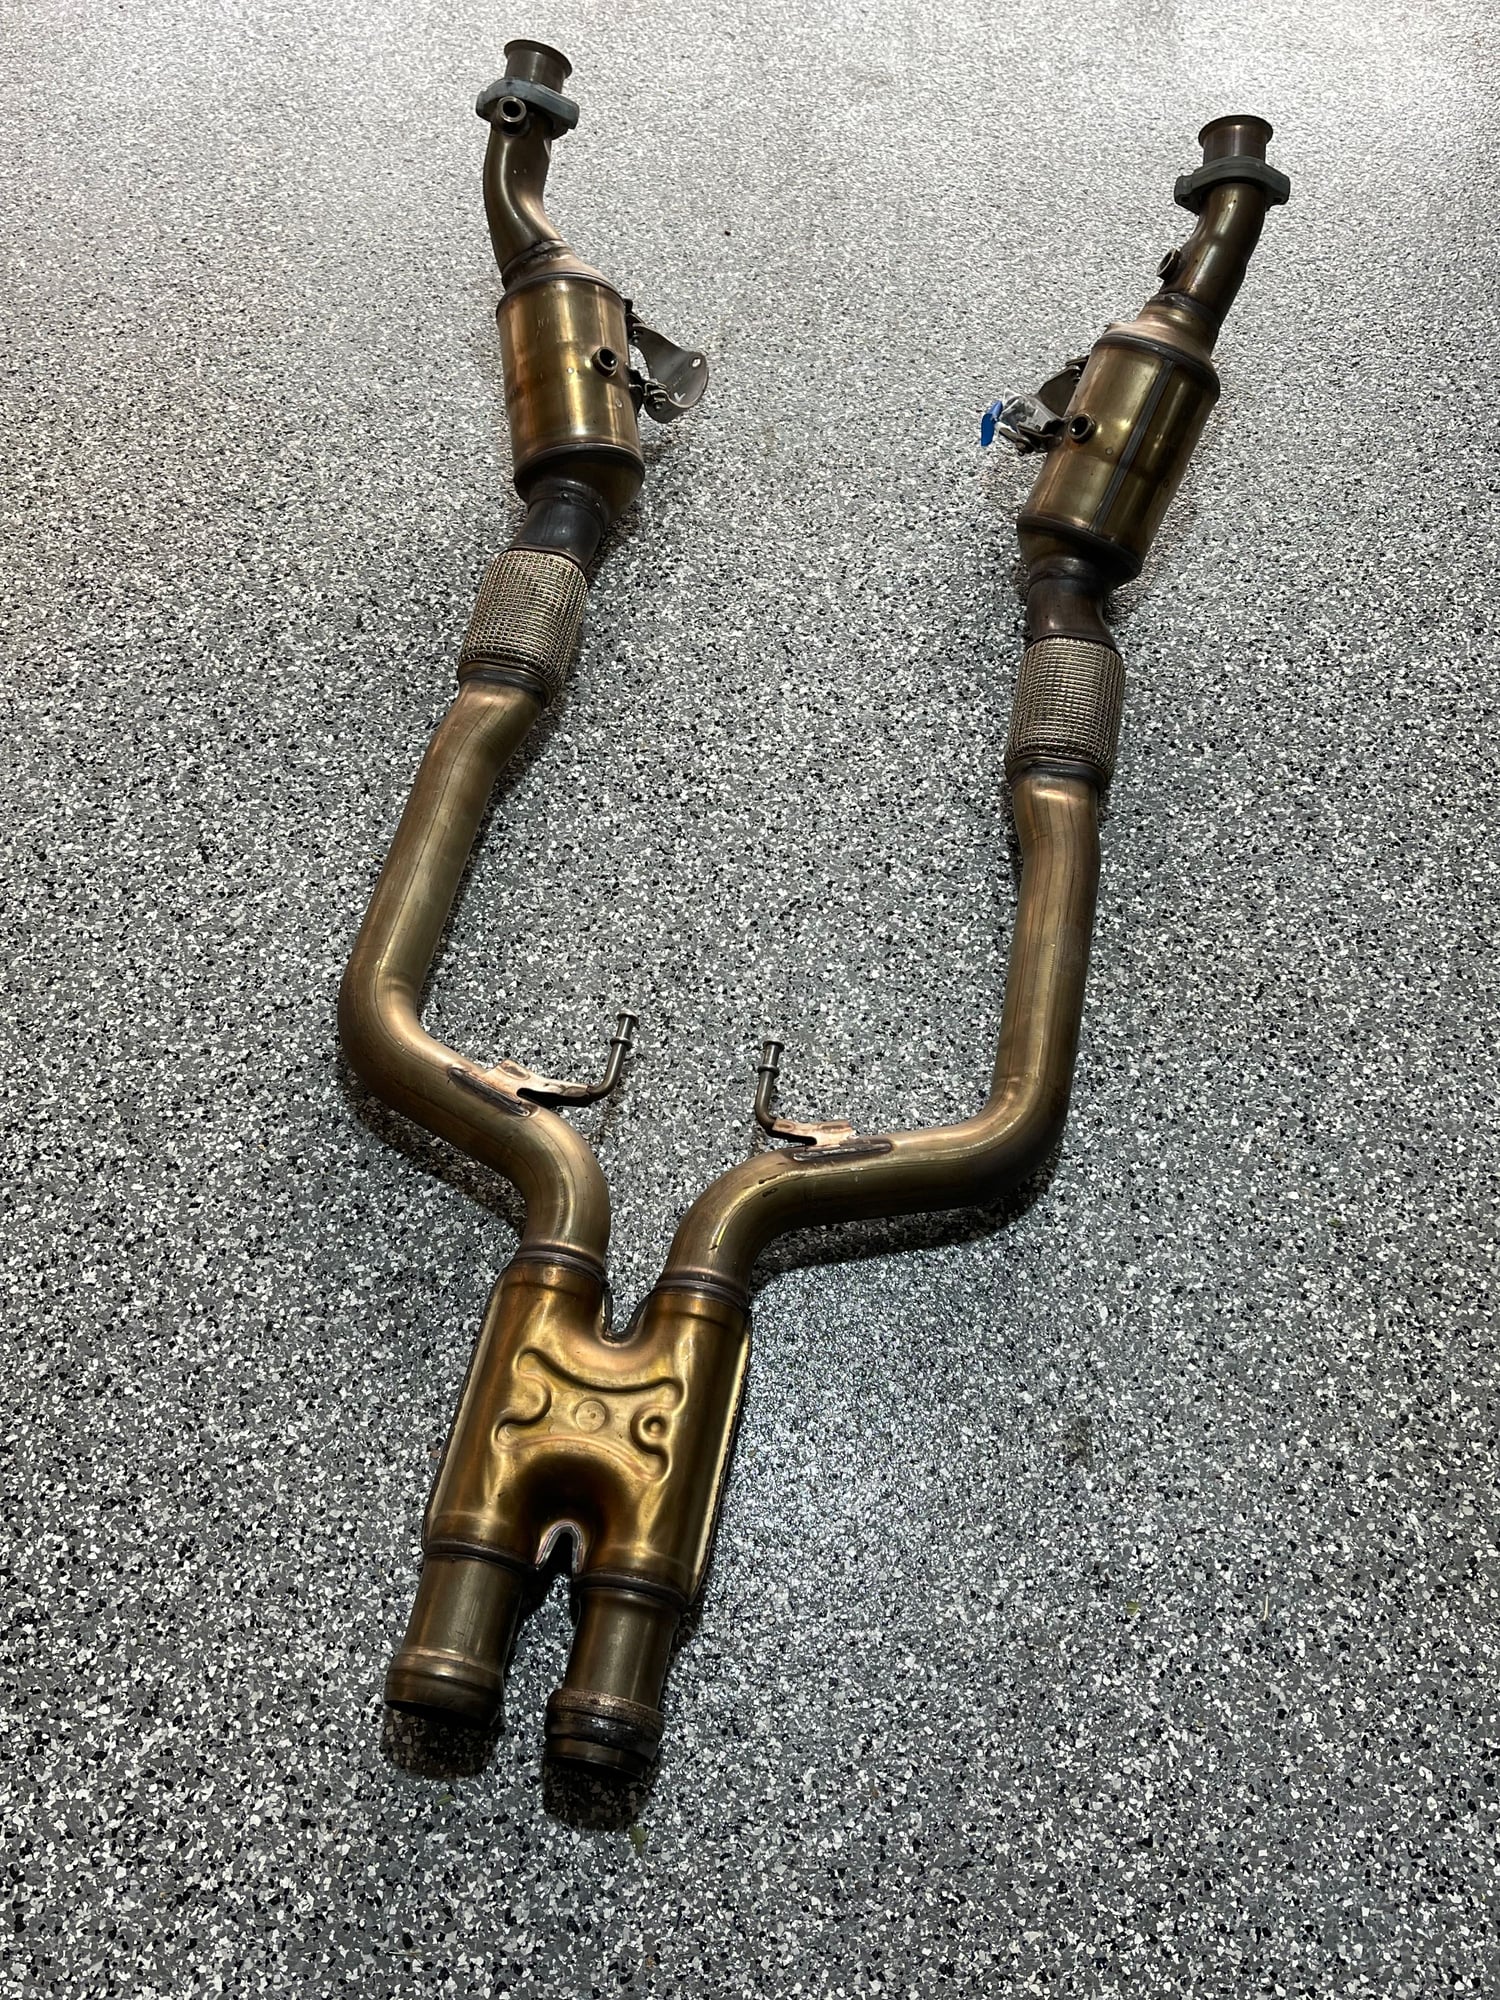 Engine - Exhaust - S550 MBH Downpipes - Used - 2015 to 2018 Mercedes-Benz S550 - Flower Mound, TX 76226, United States